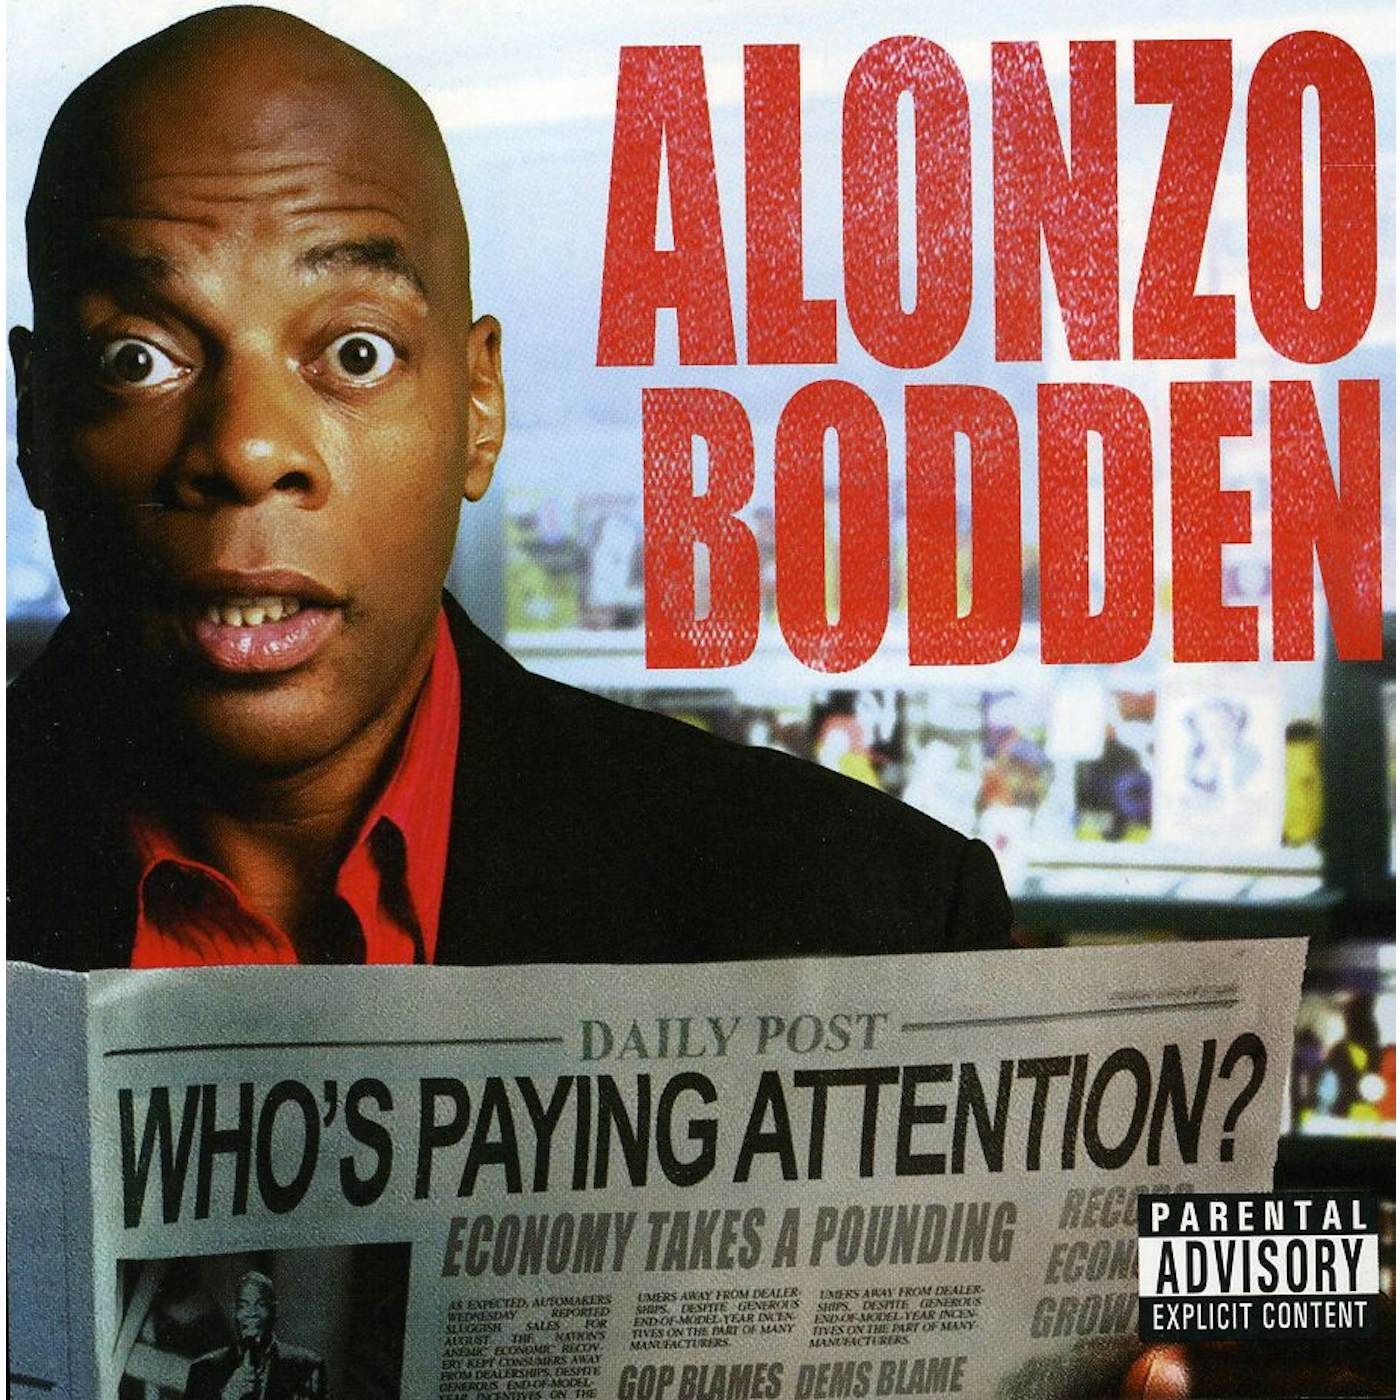 Alonzo Bodden WHOS PAYING ATTENTION CD